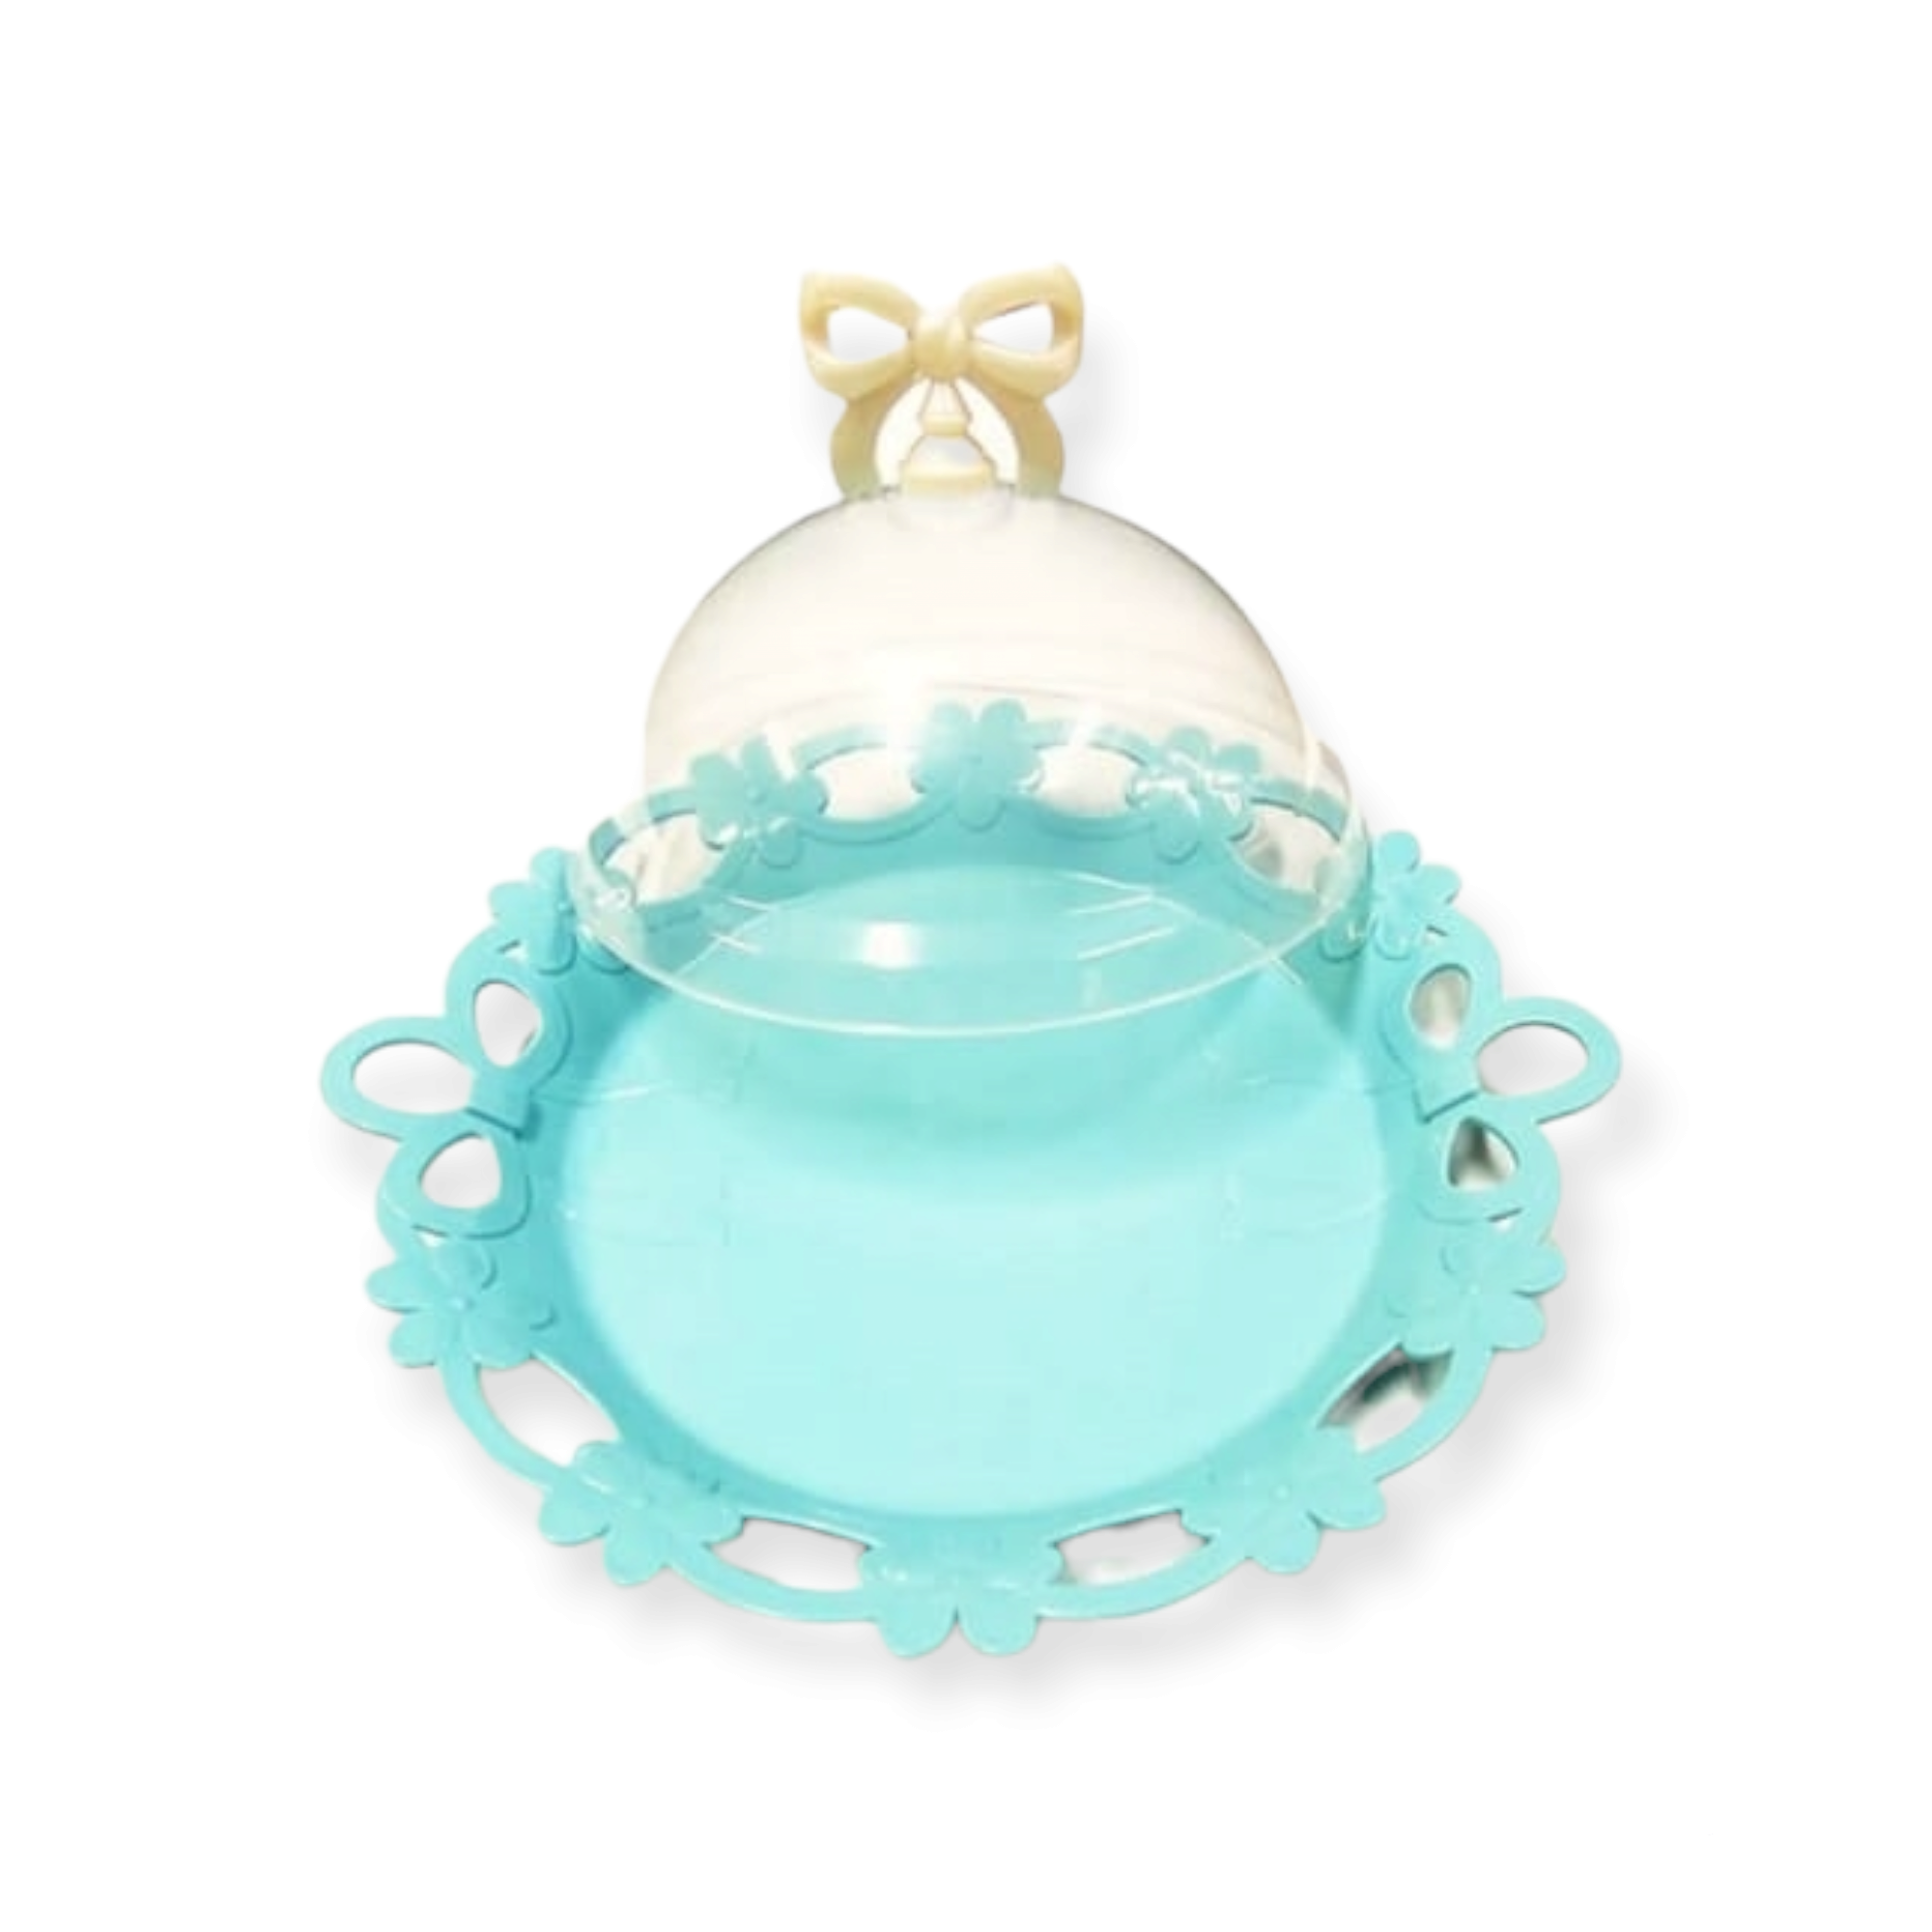 Patisserie Cake Plate with Dome Cover D31cm